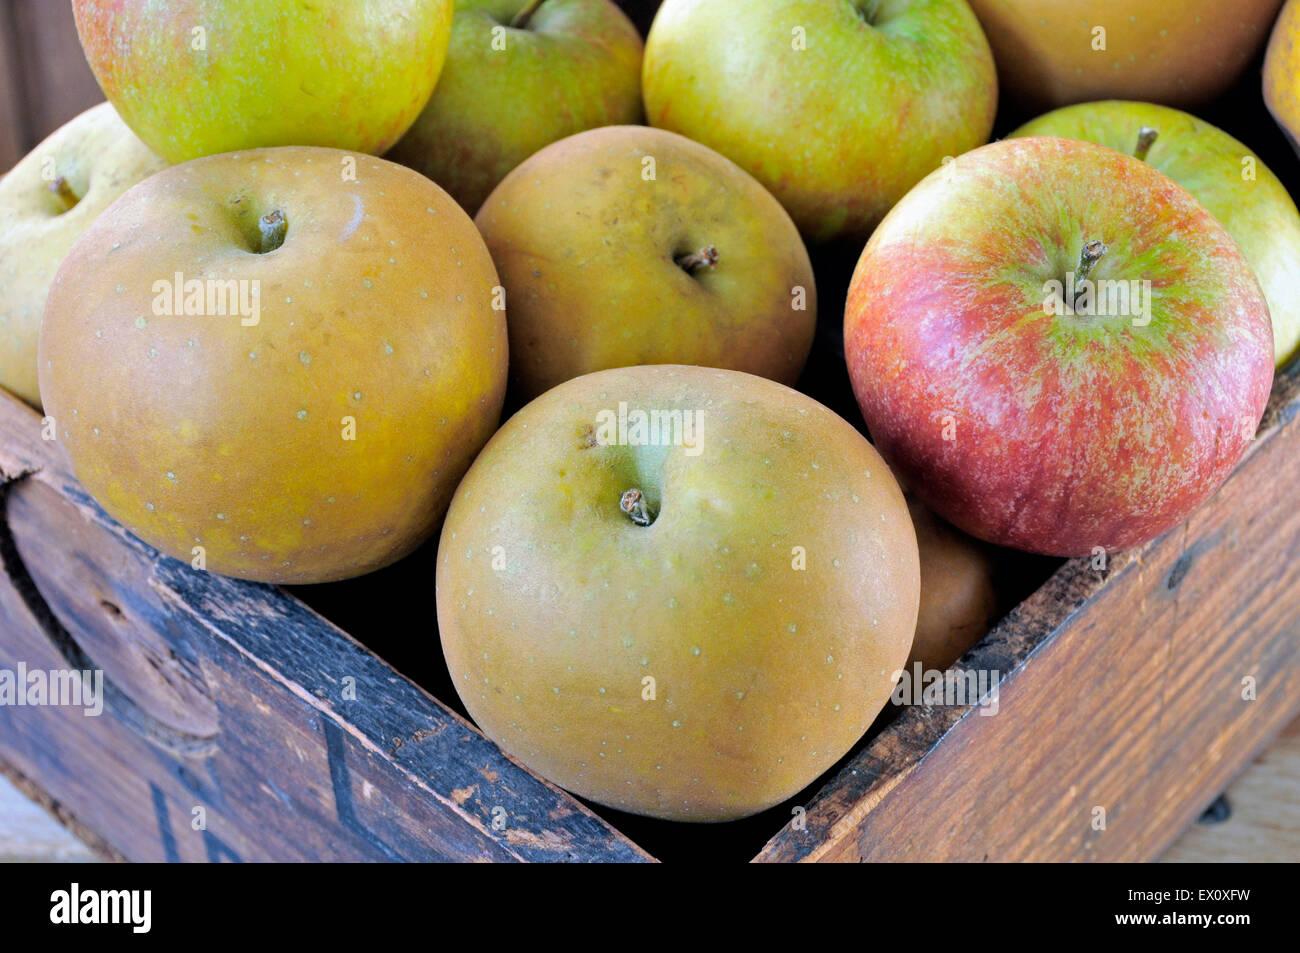 Malus domestica - Egremont russet apples alongside Cox in old vintage wooden box. Stock Photo